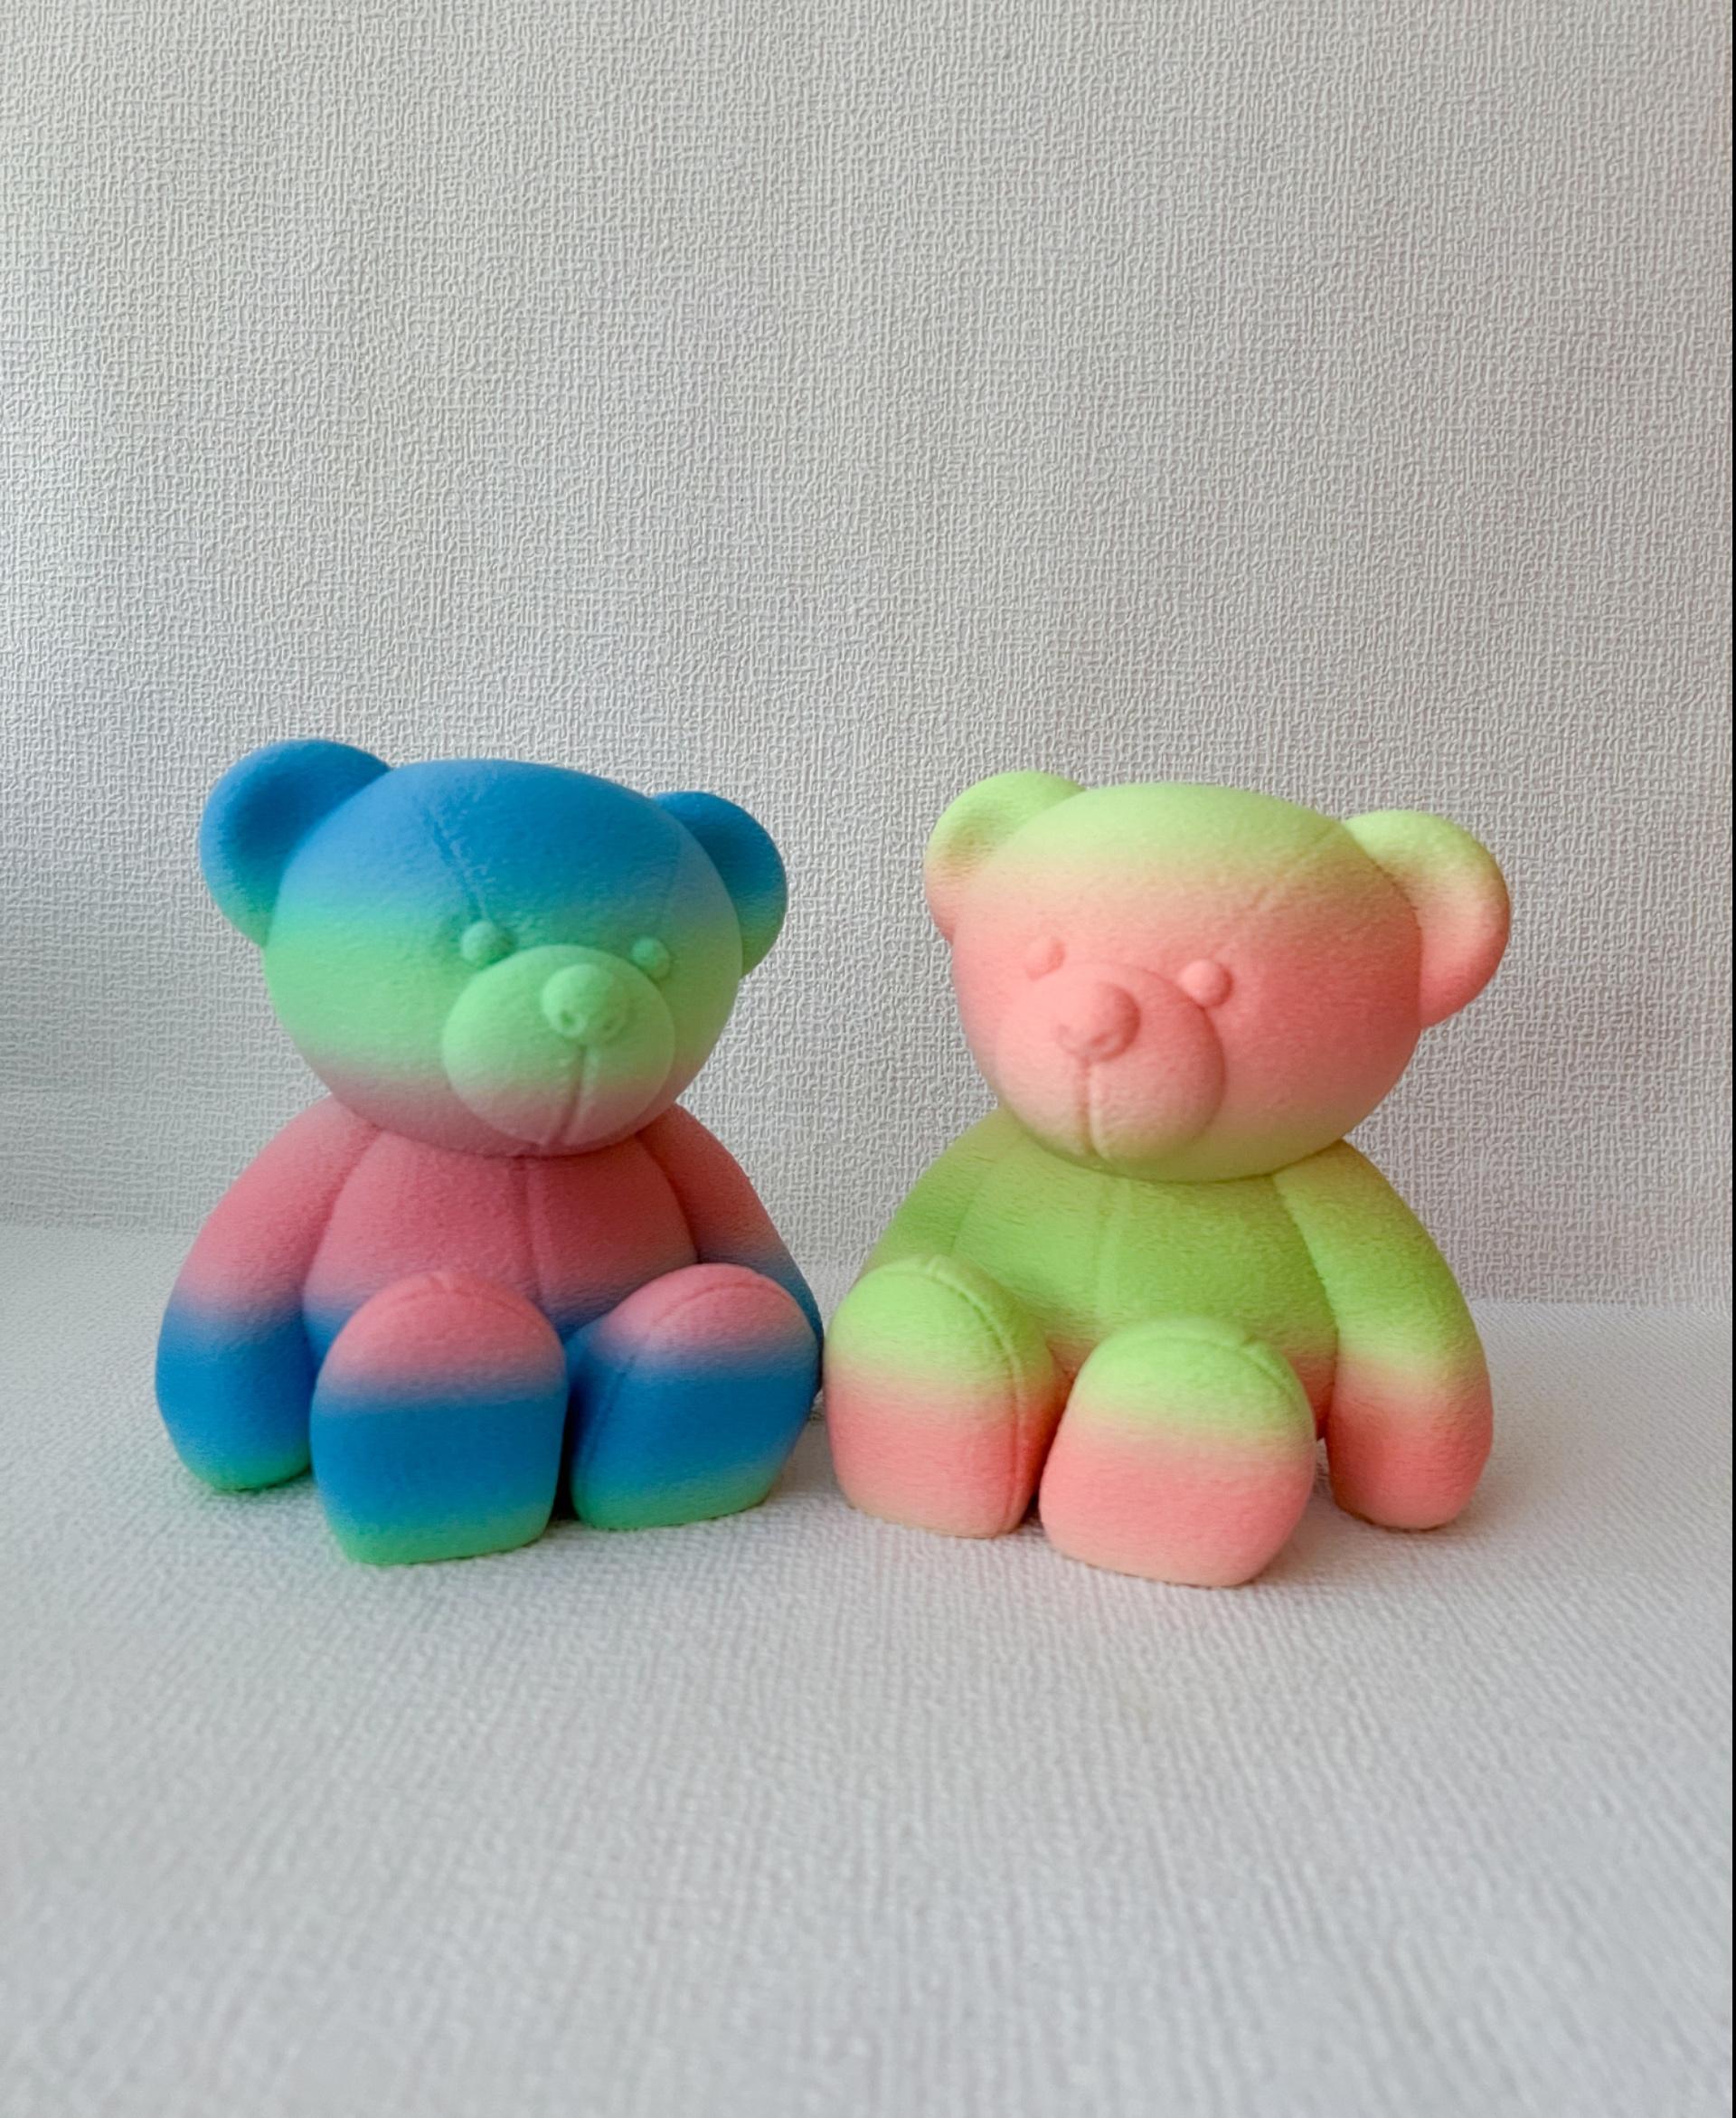 Barry Bear - Friend for life!🥰
Isanmate rainbow filament - 3d model